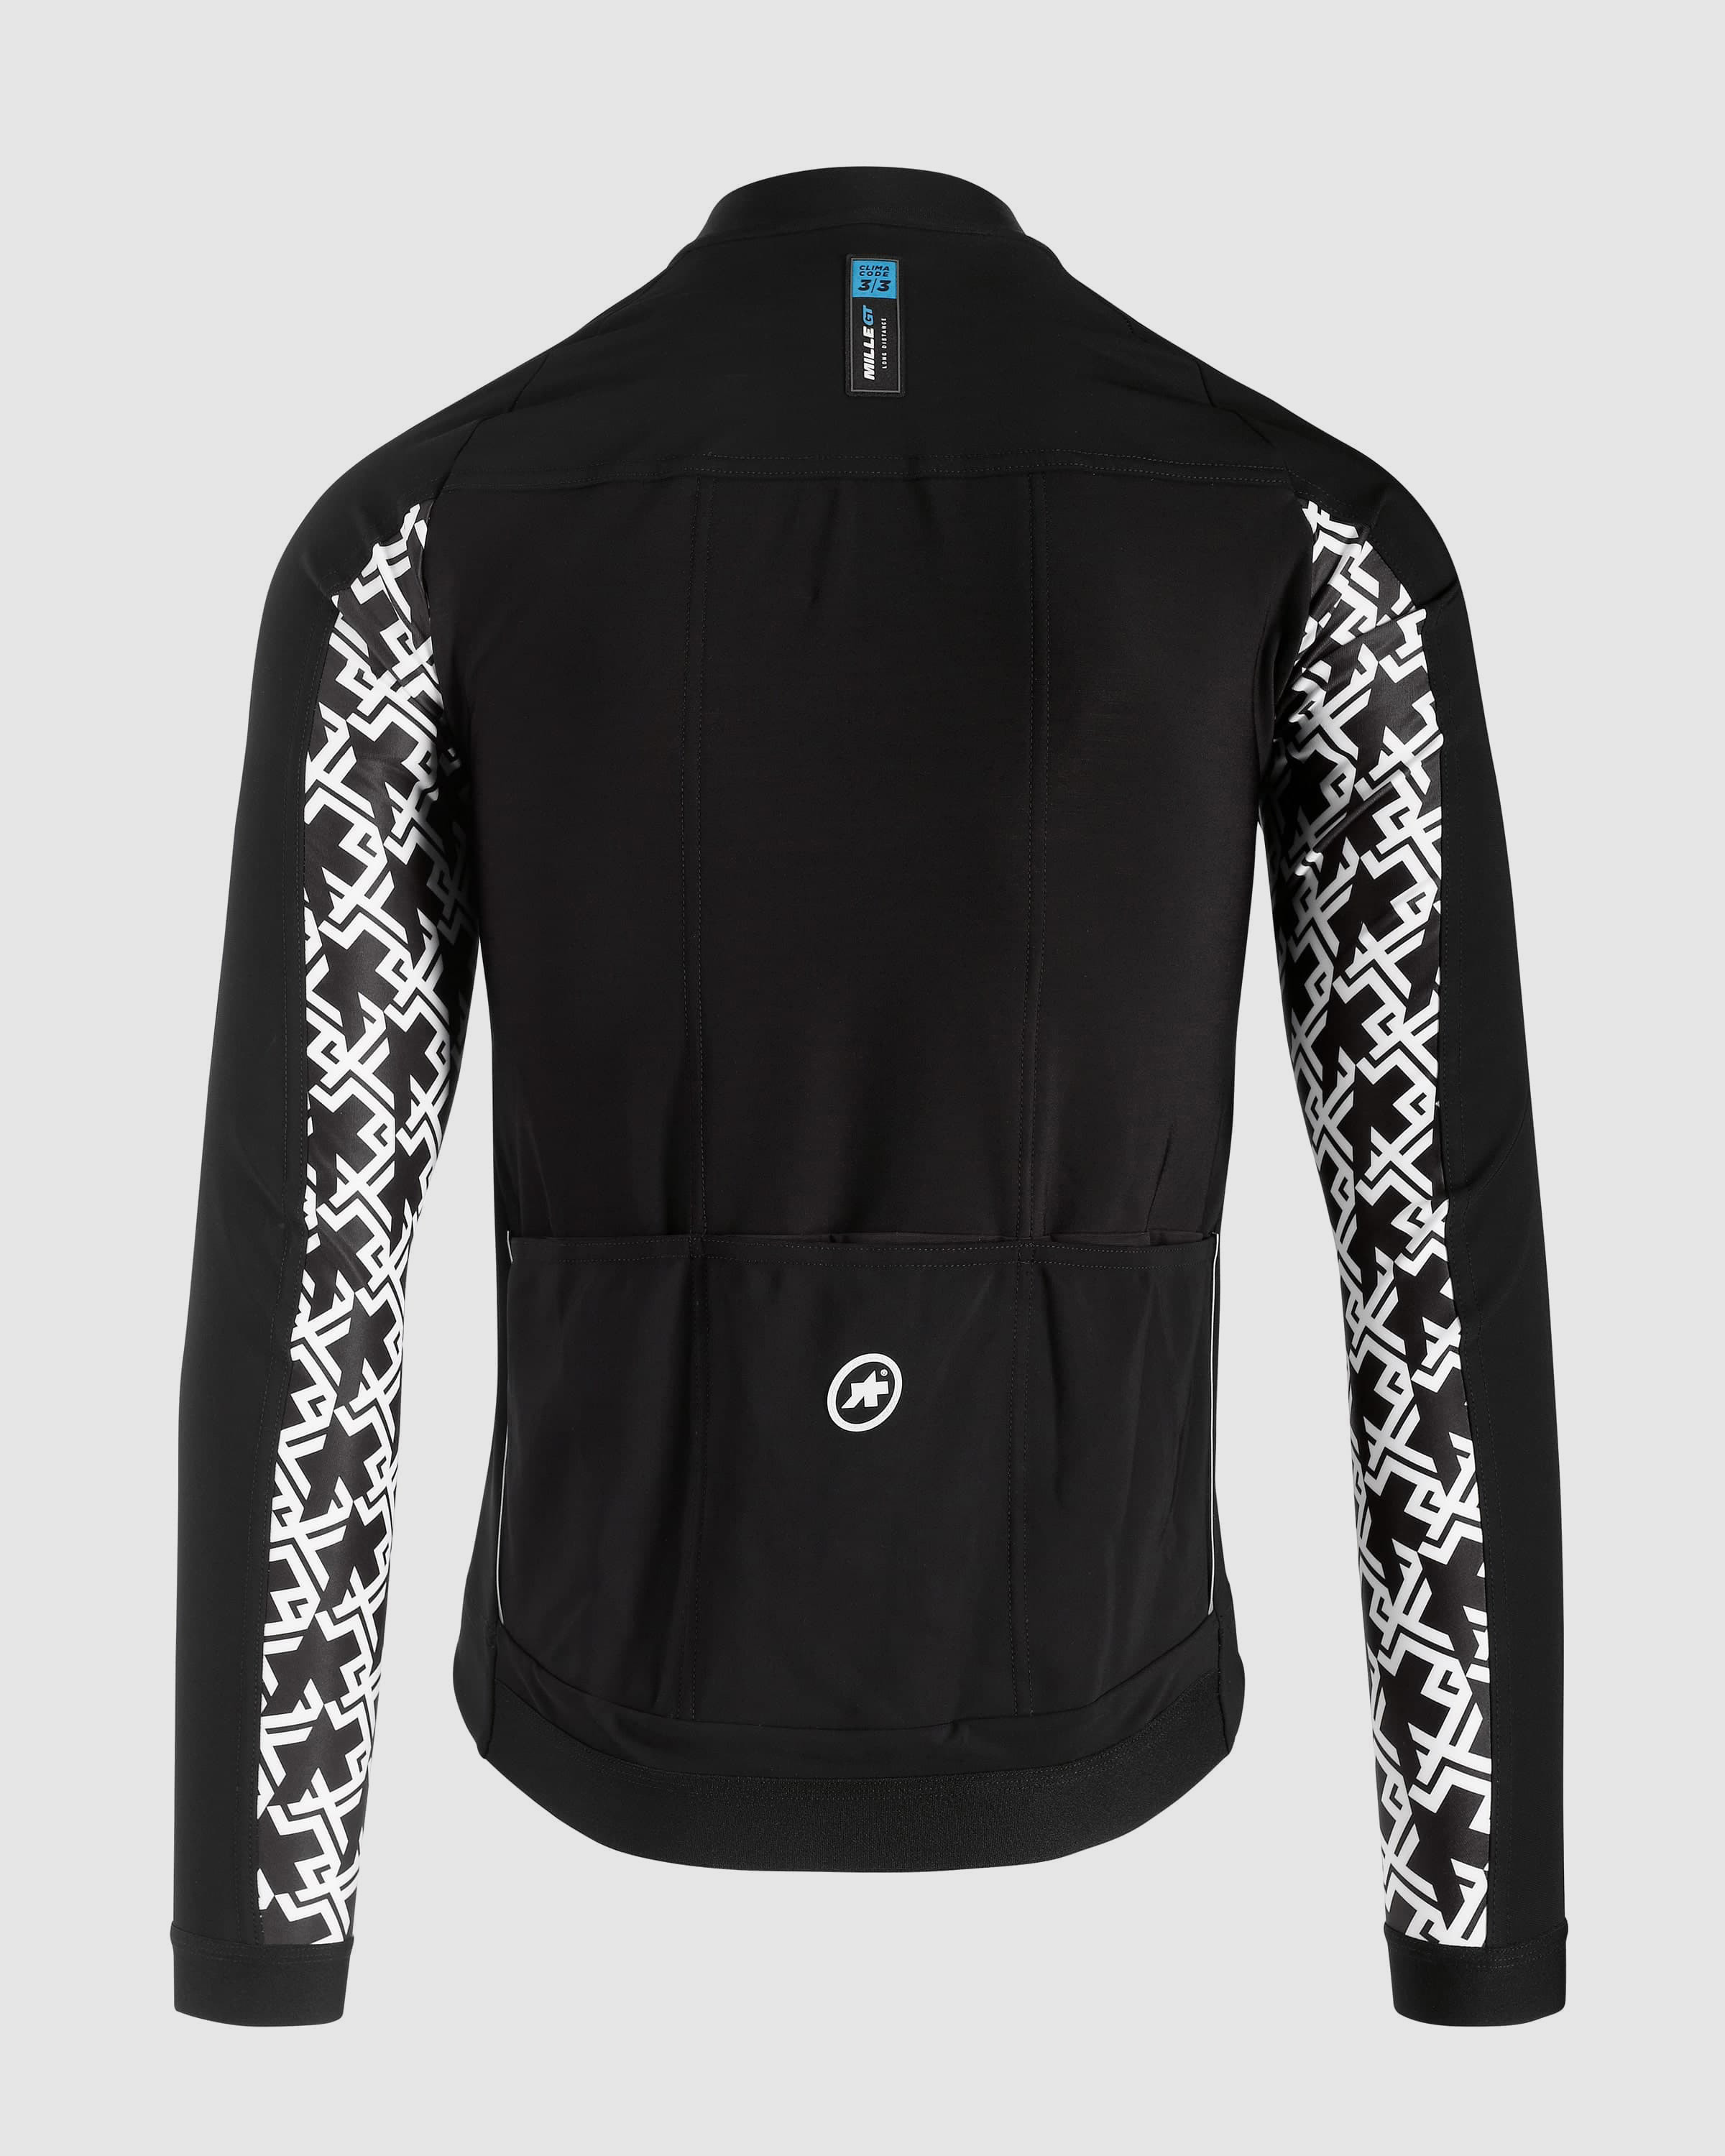 MILLE GT winter Jacket - ASSOS Of Switzerland - Official Outlet